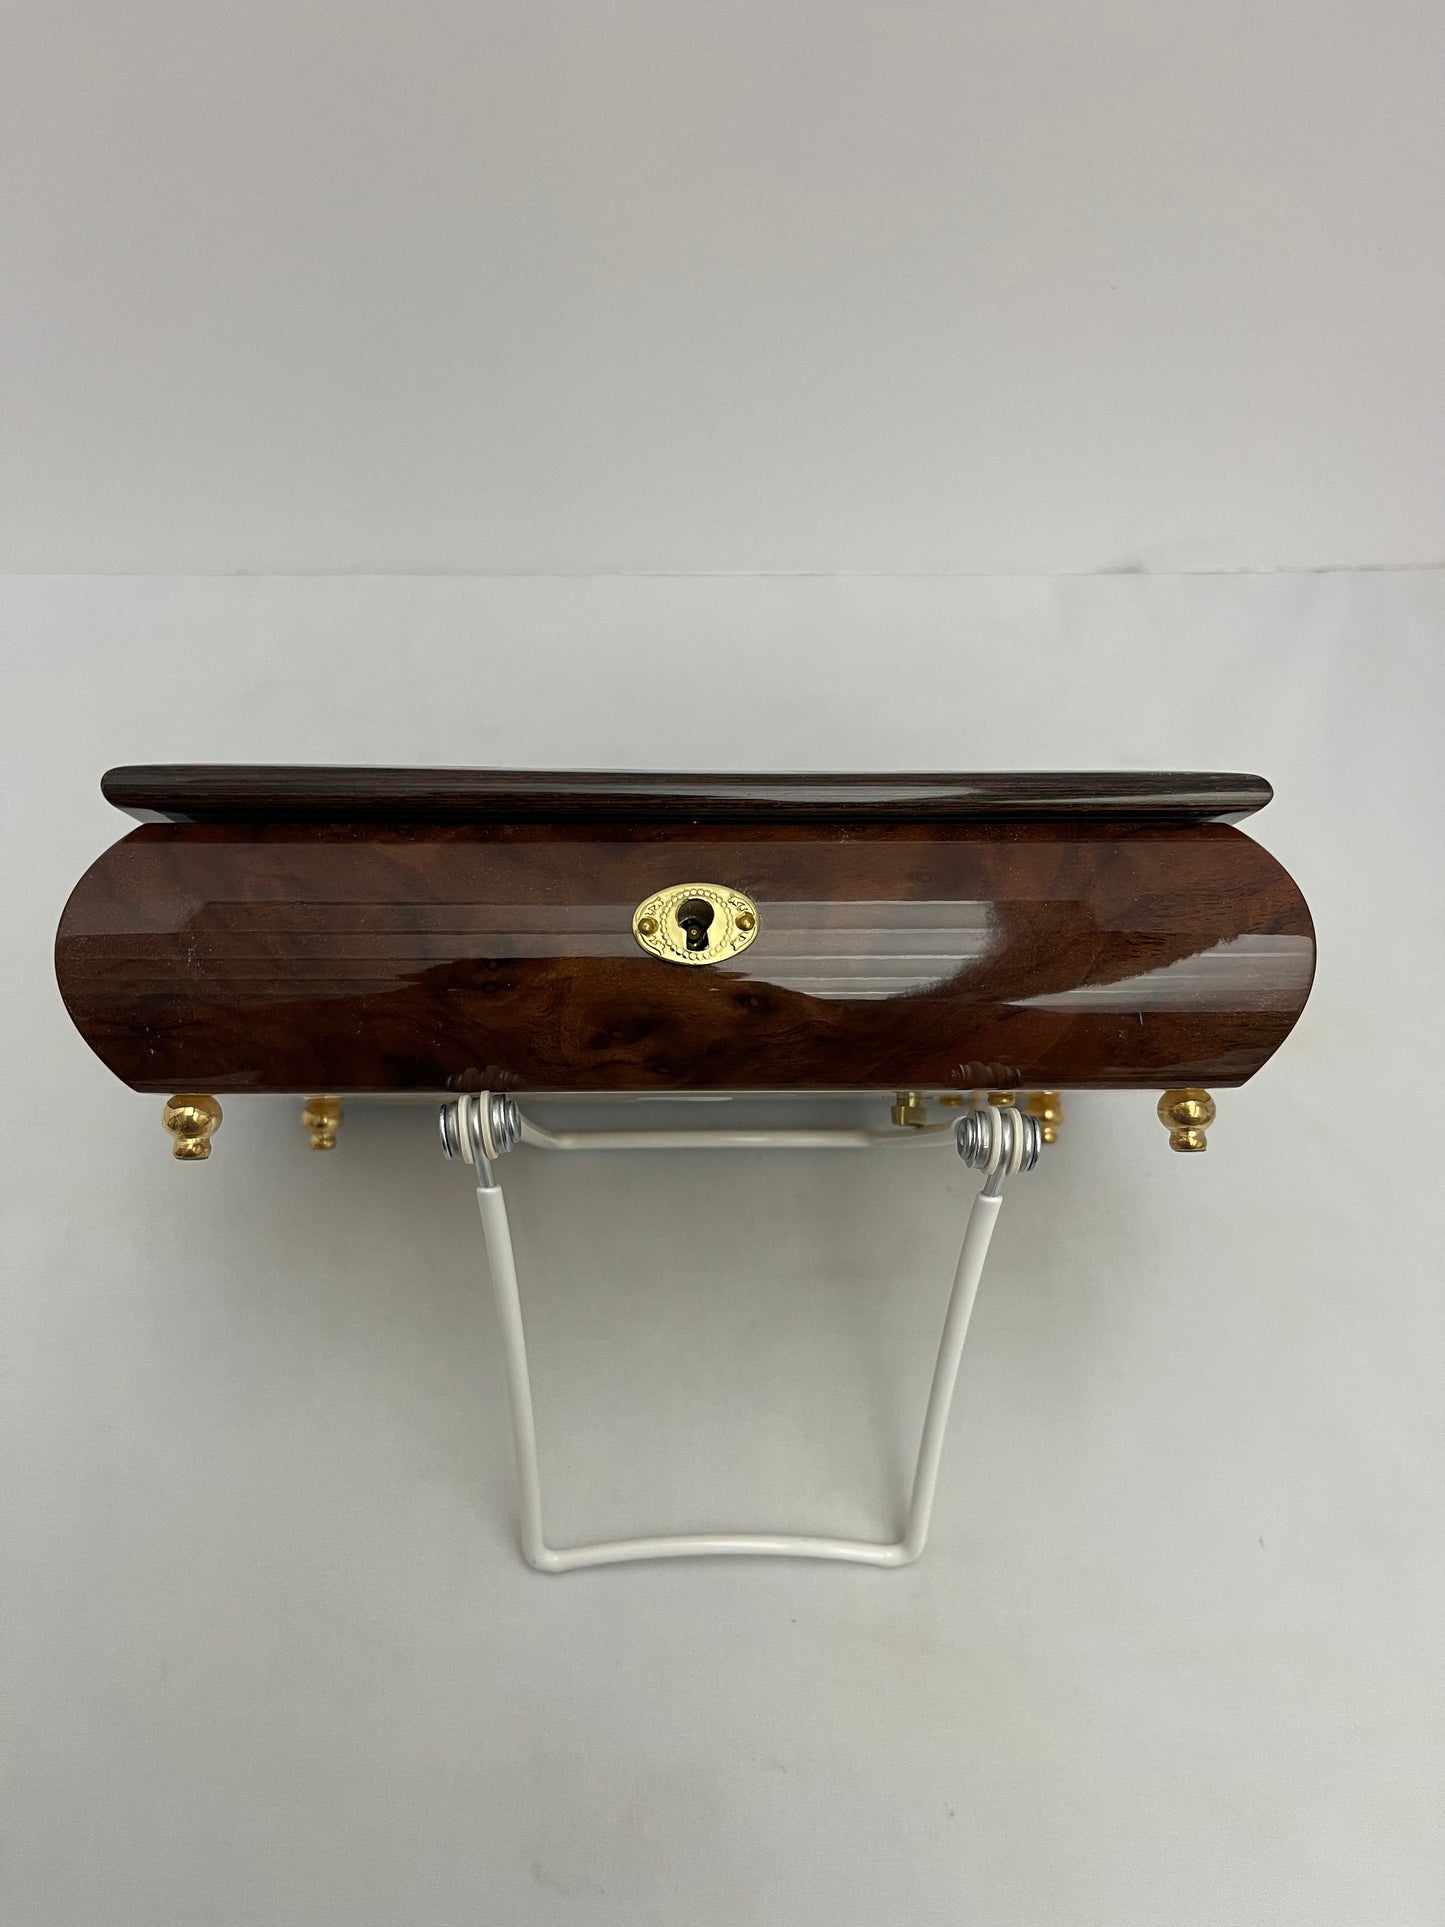 Inlaid Sorrento Italy Music Box, Reuge "Moon River”